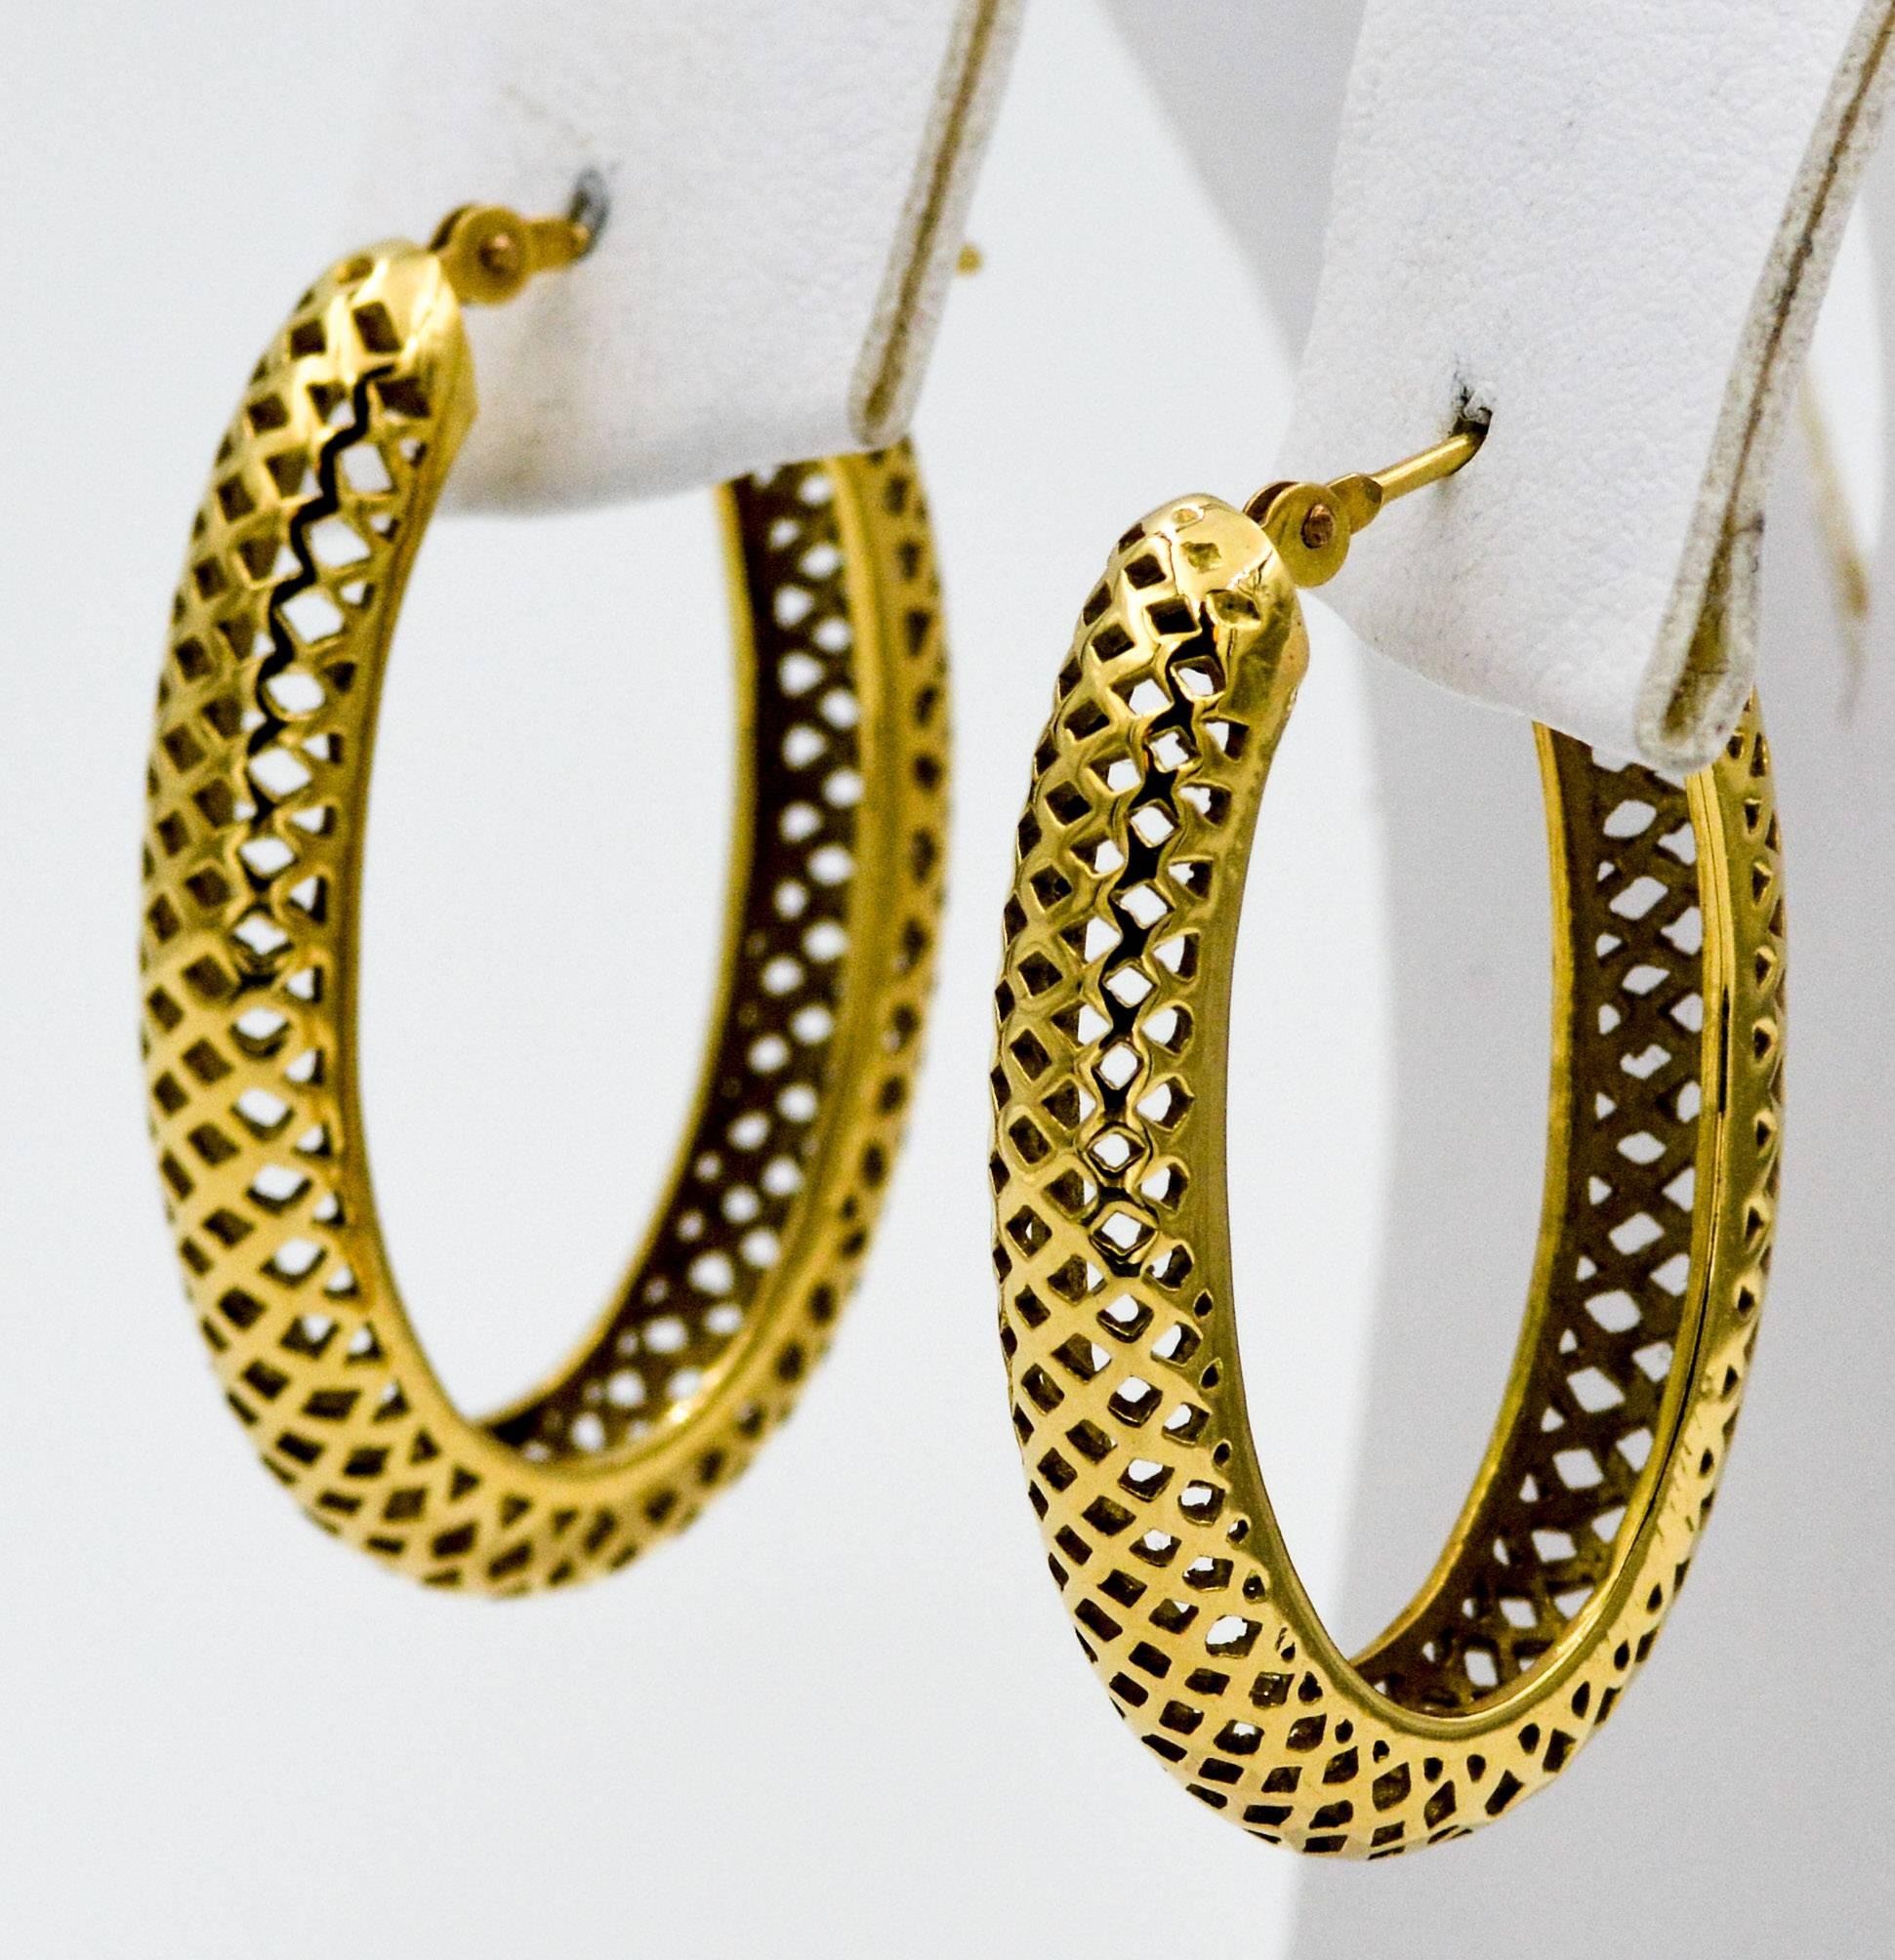 Experience the easy alternative to solid gold in these classic Ray Griffith hoop earrings. Executed in the Ray Griffith signature style of open crown worked hollow stock, these 18 karat yellow gold earrings are shaped into an elegant oval hoop that